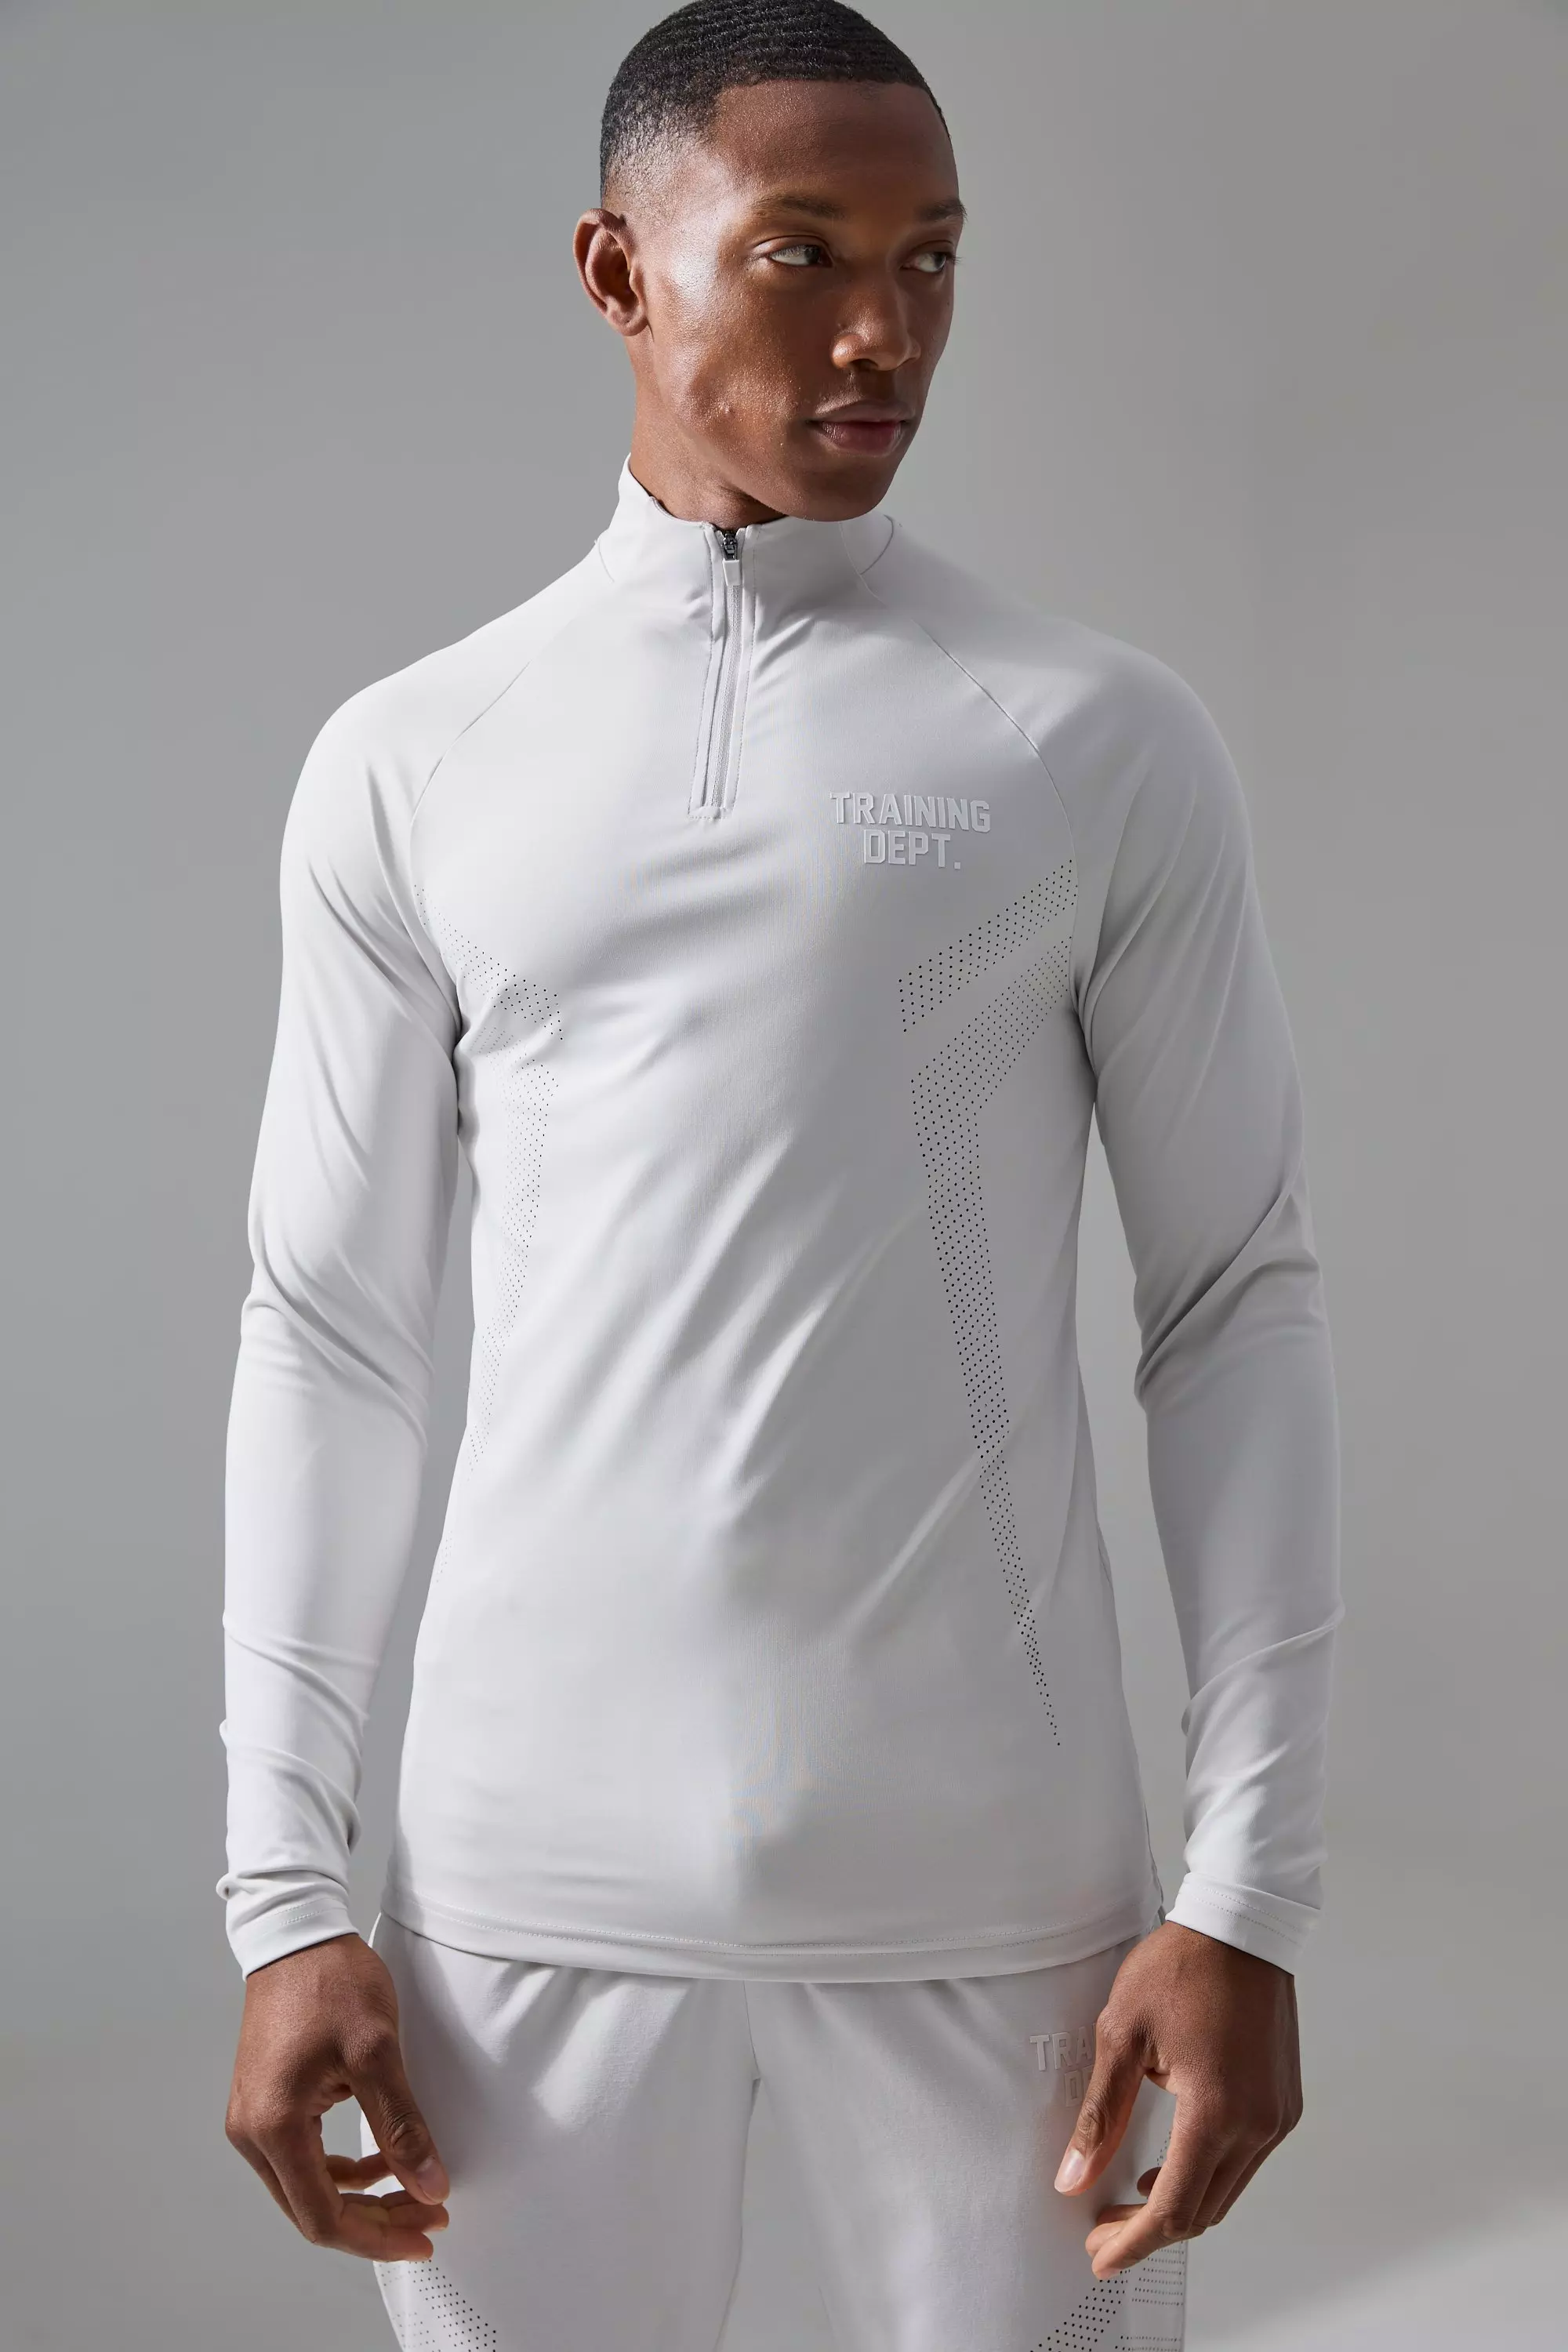 Grey Active Training Dept Muscle Fit Perforated Quarter Zip Top